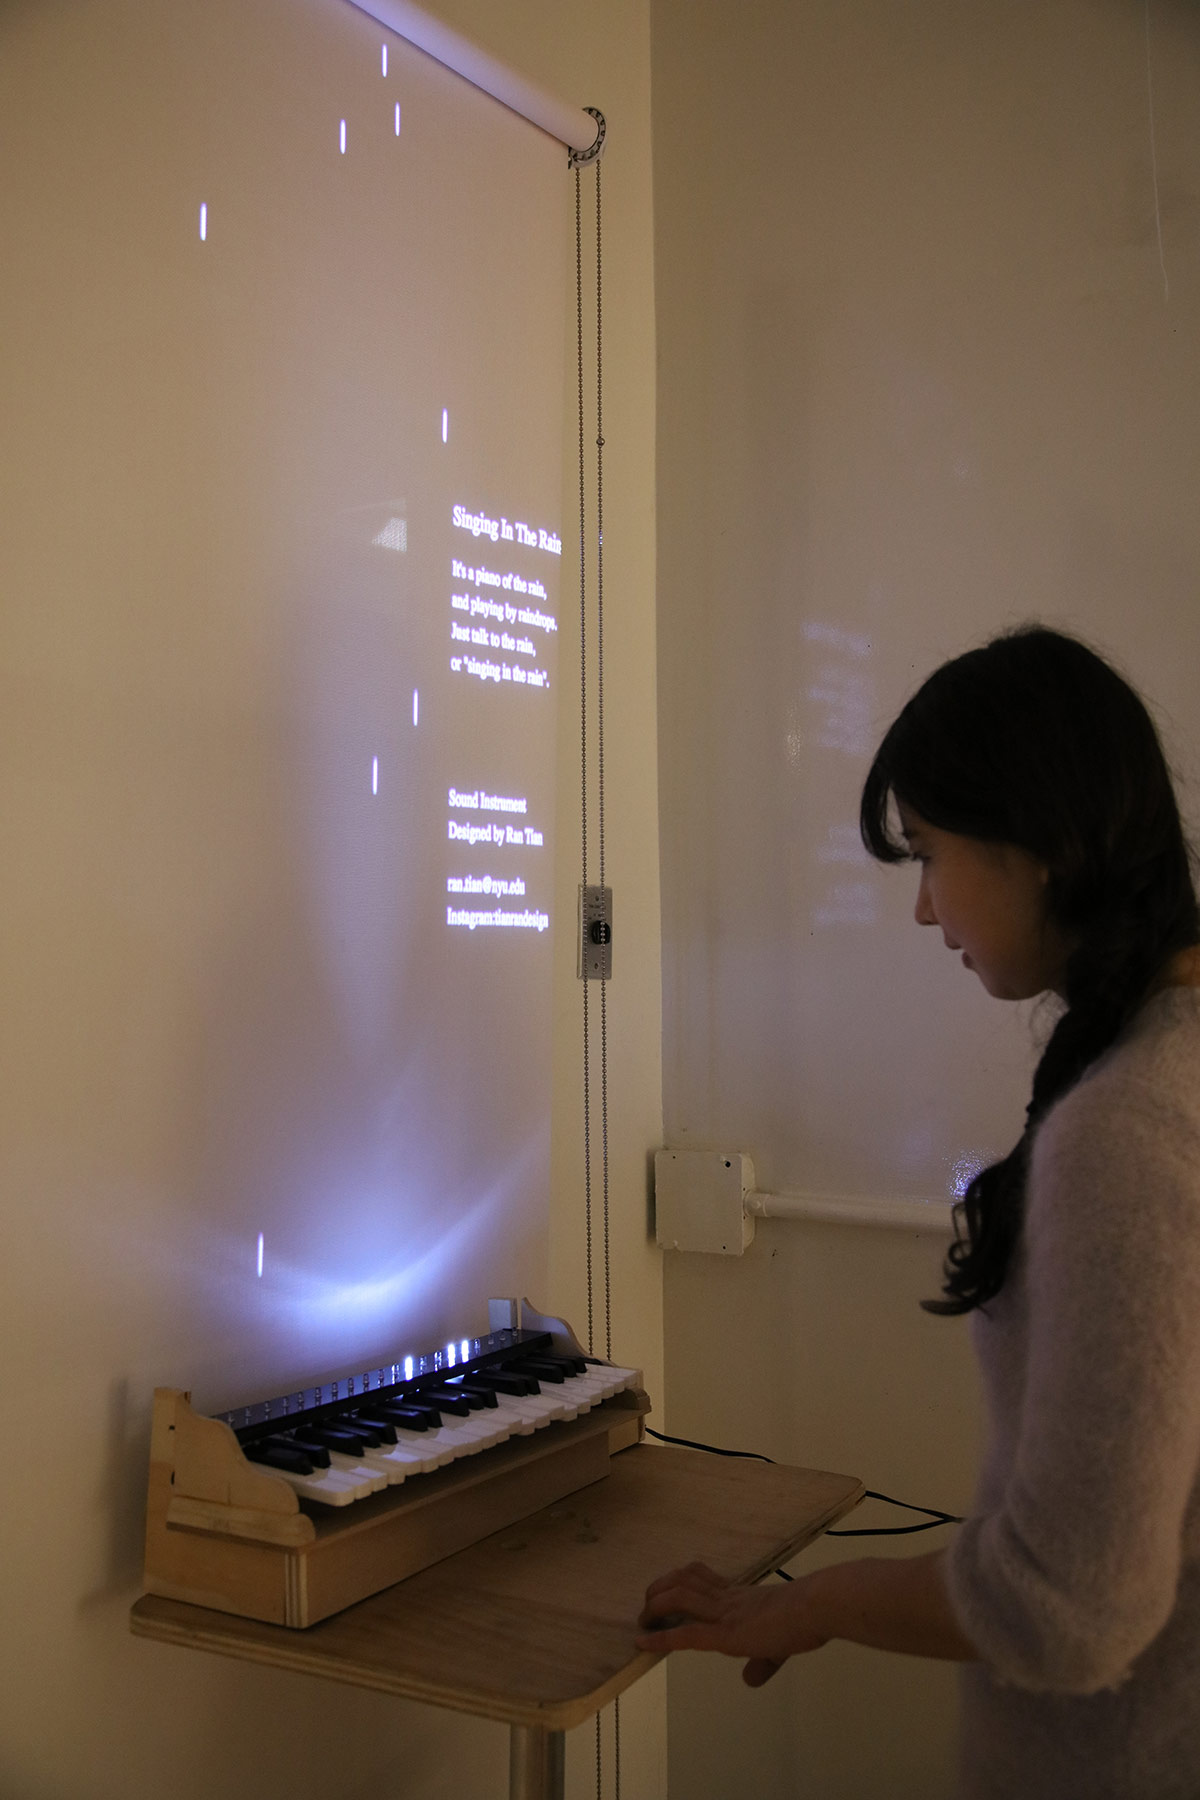 a woman standing in front of a small keyboard that is triggering lights on the projection behind it